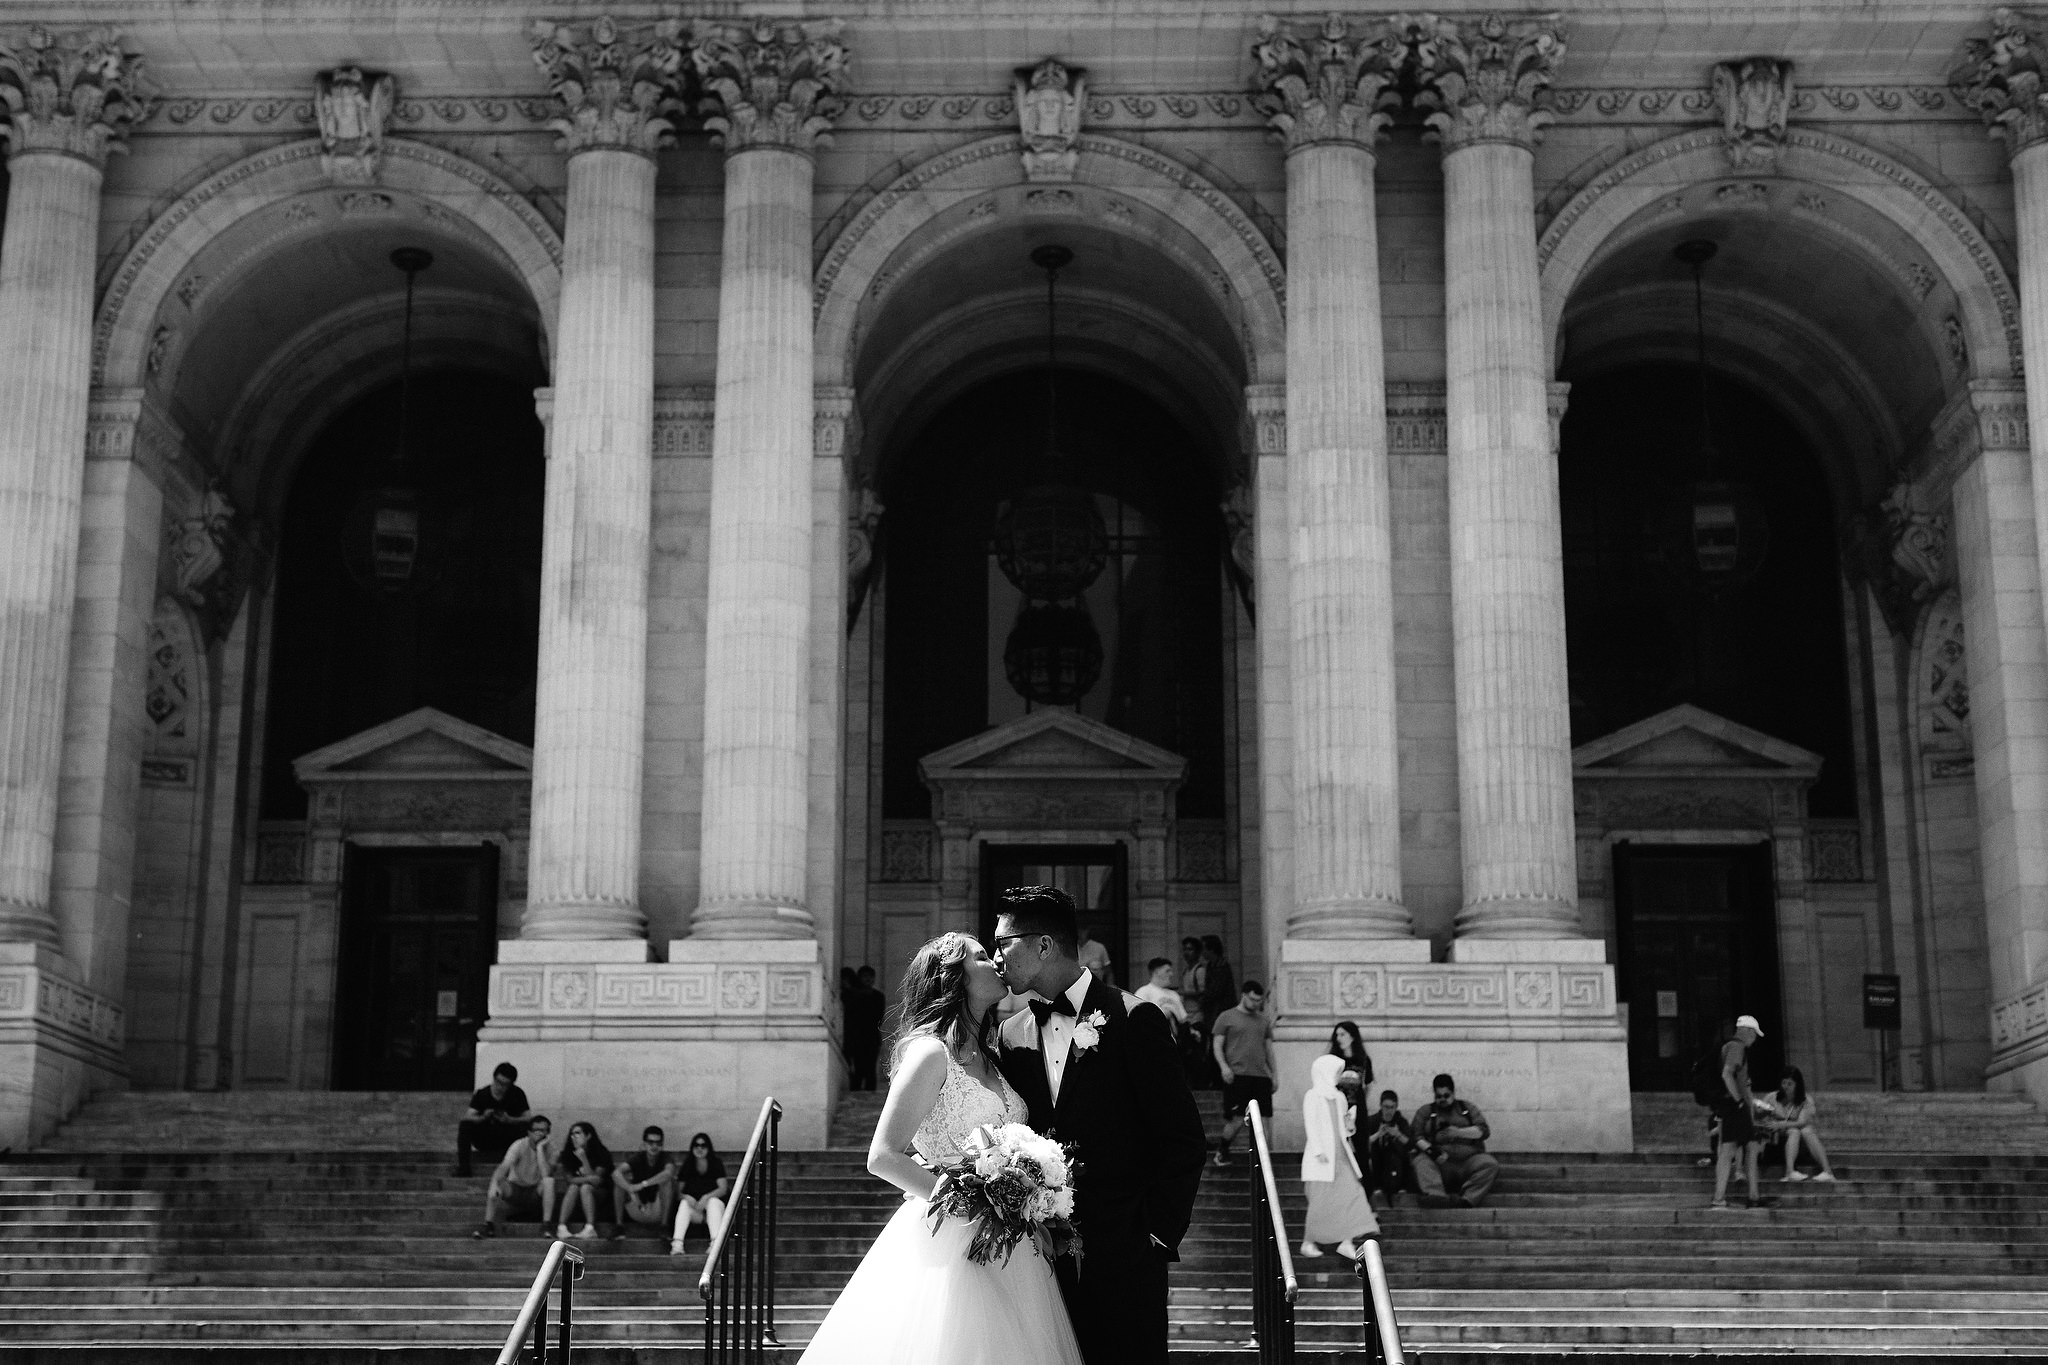 Man and woman kiss outside of the New York Public Library